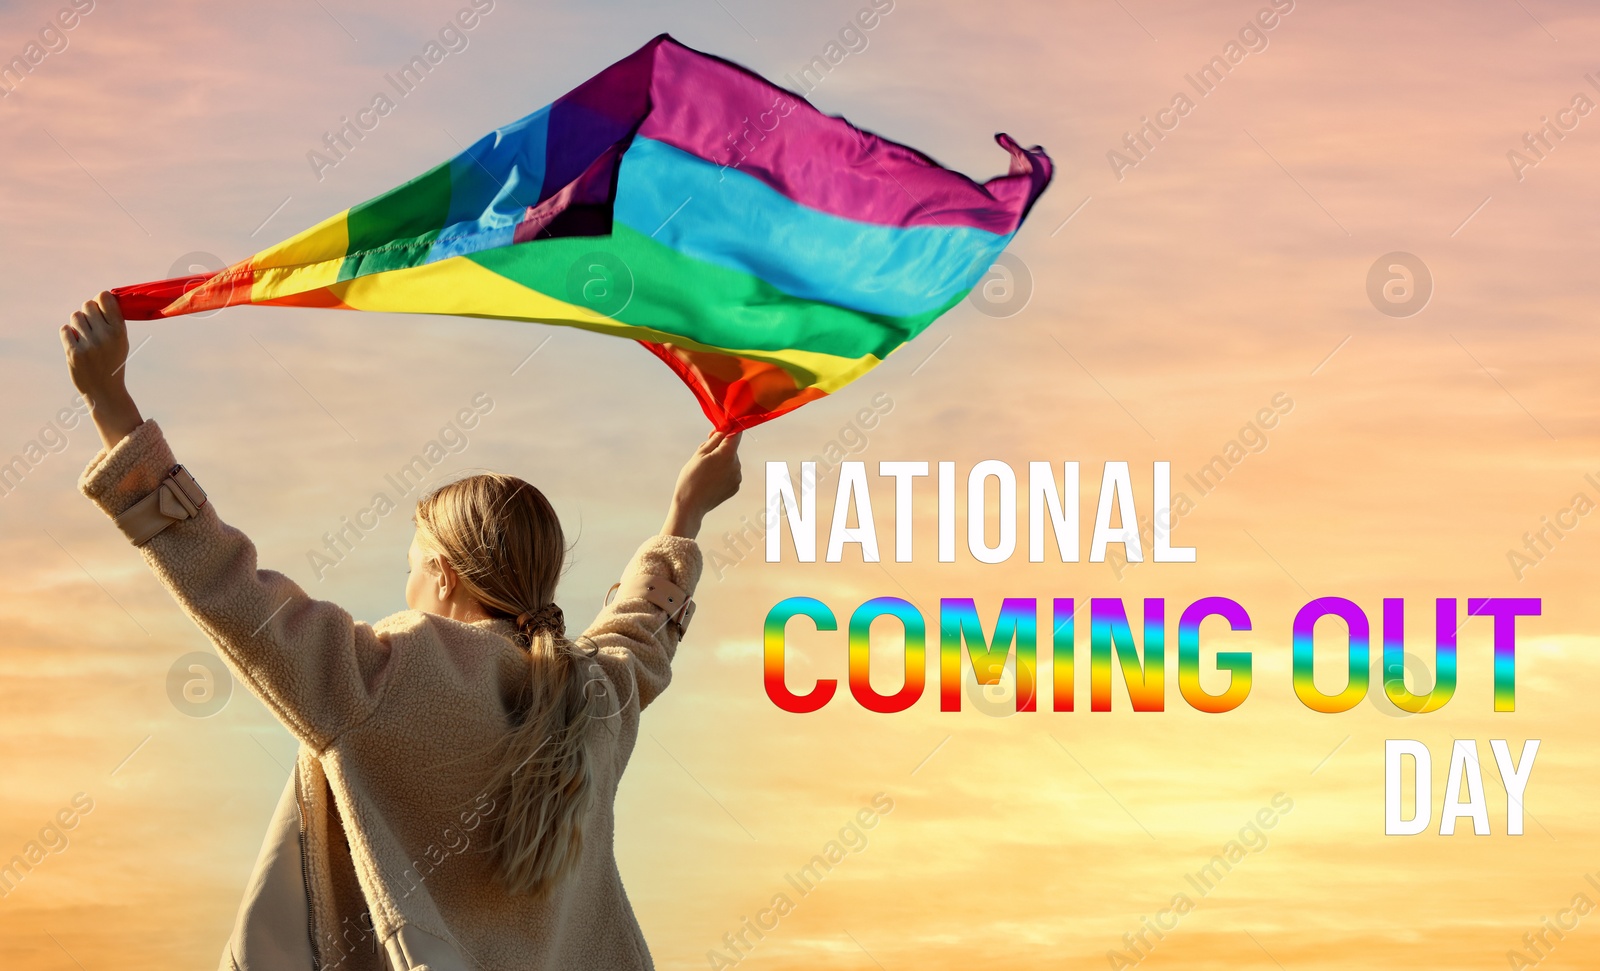 Image of National Coming Out day. Woman holding bright LGBT flag against sky, back view